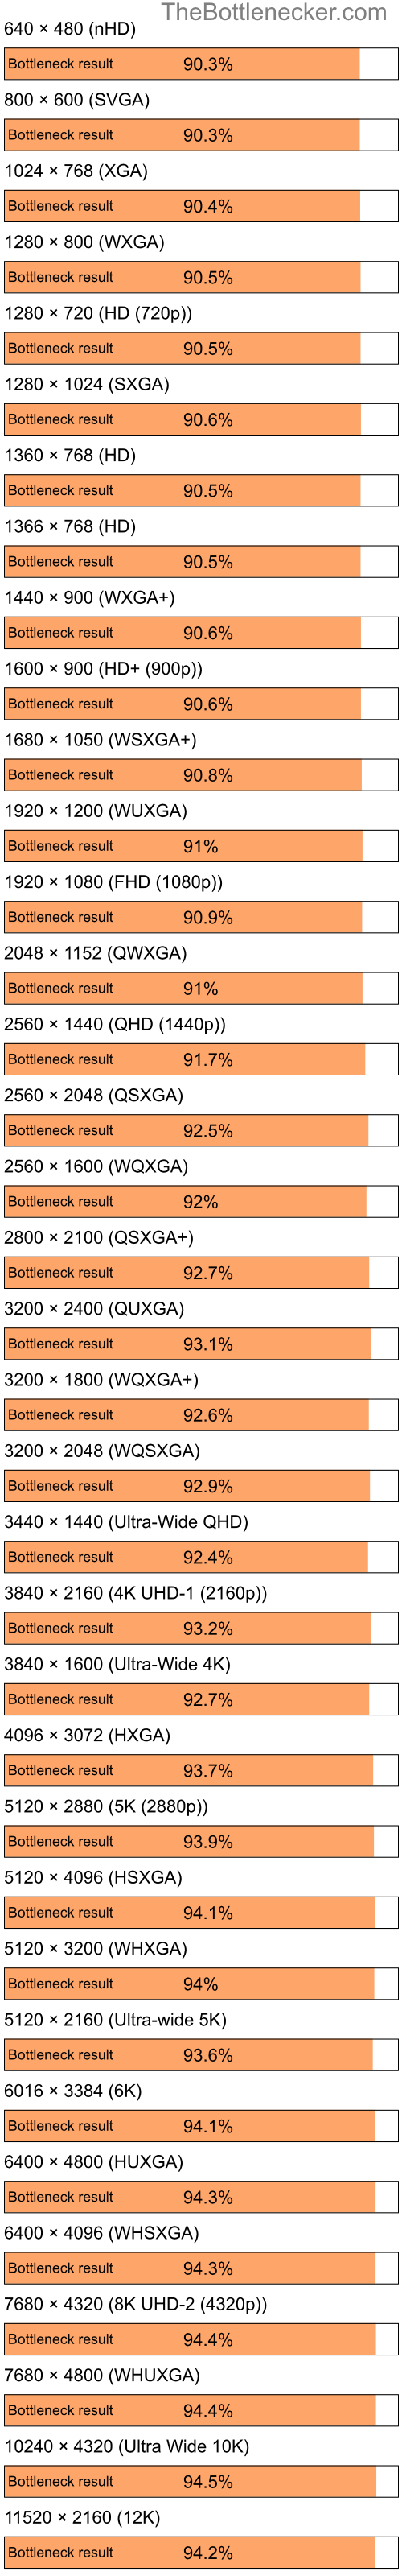 Bottleneck results by resolution for Intel Celeron M 420 and NVIDIA GeForce4 MX 420 in7 Days to Die